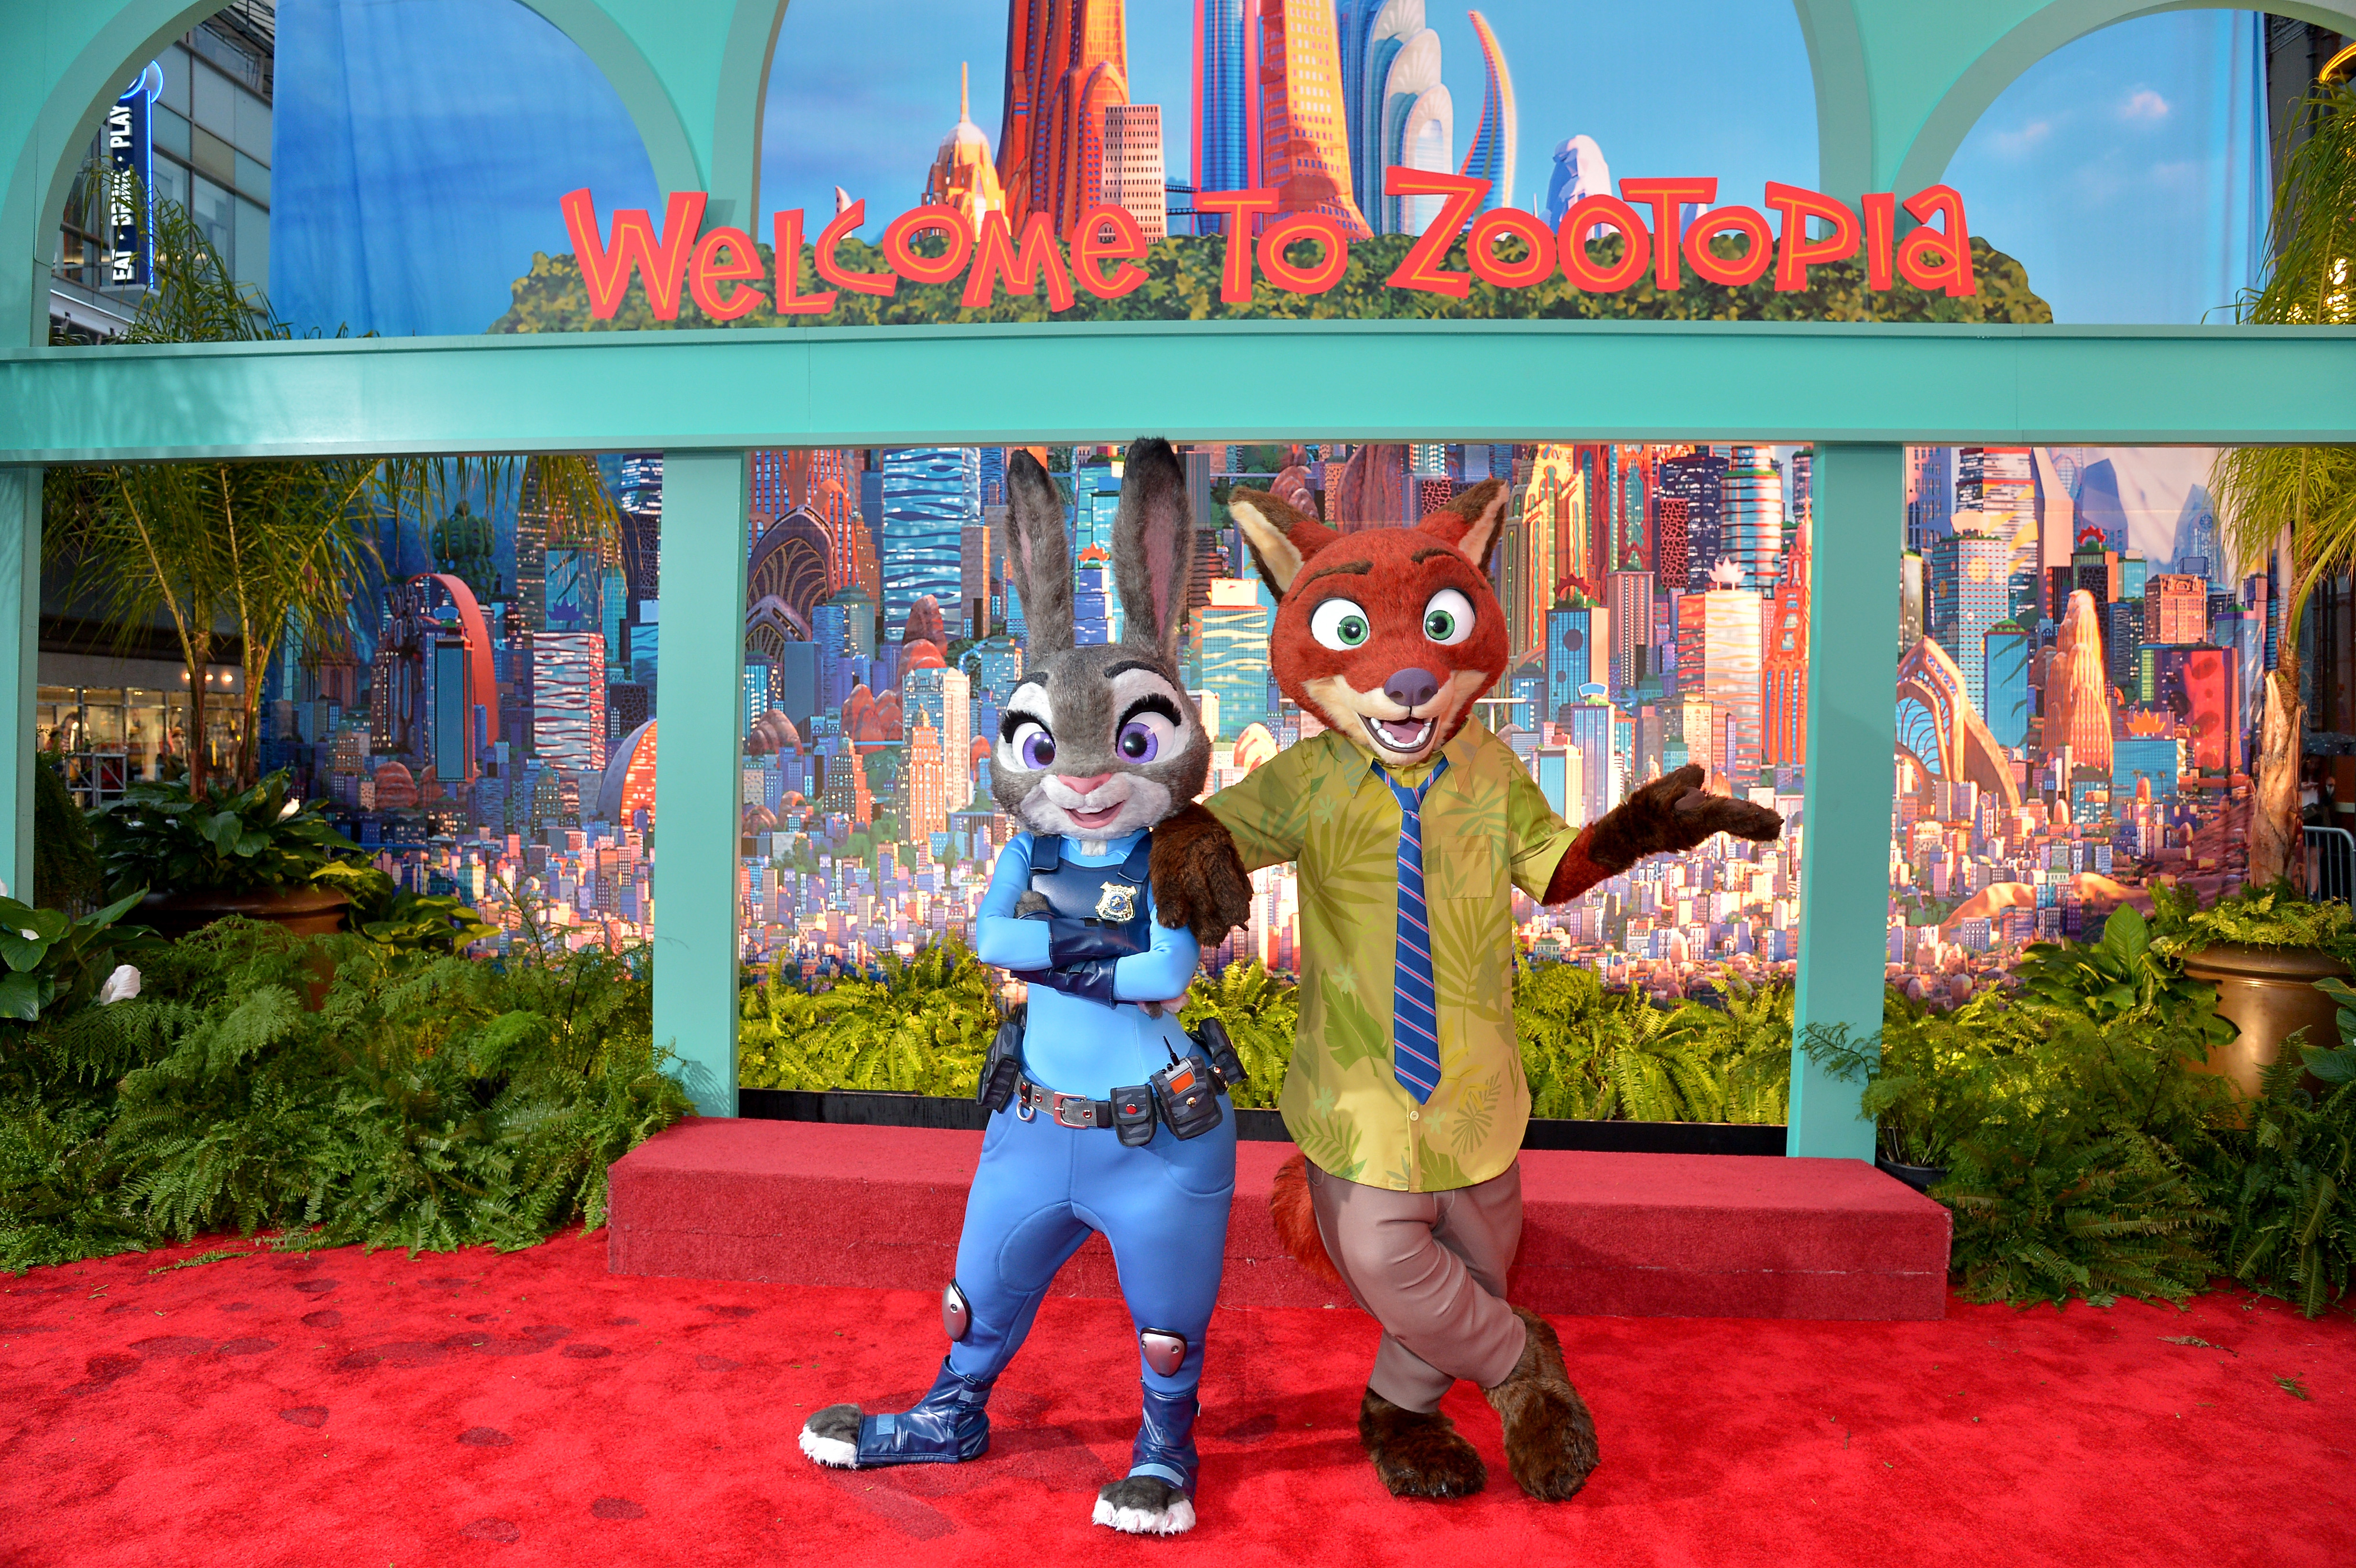 Zootopia at Hollywood's El Capitan Theatre! - ALONG COMES MARY